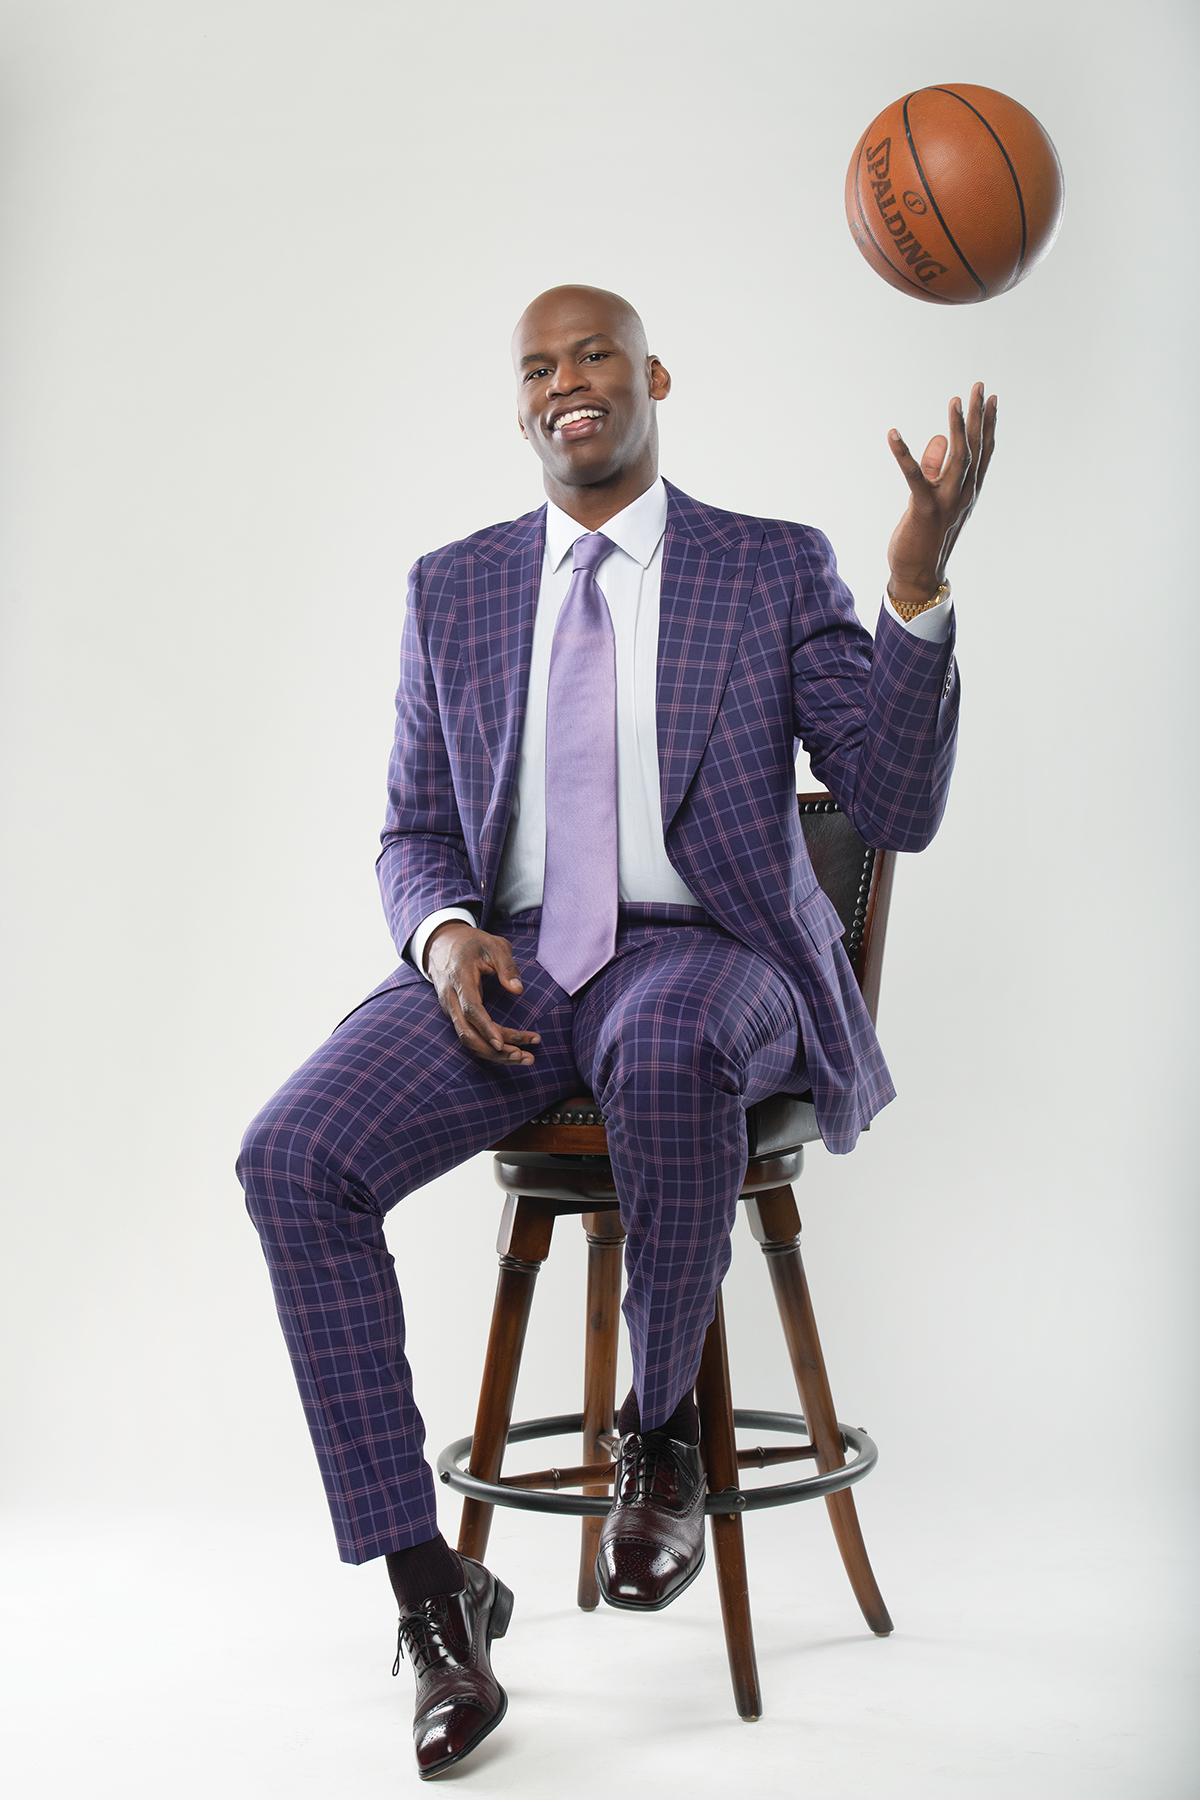 Al Harrington with a basketball in a purple suit and tie for Viola Brands